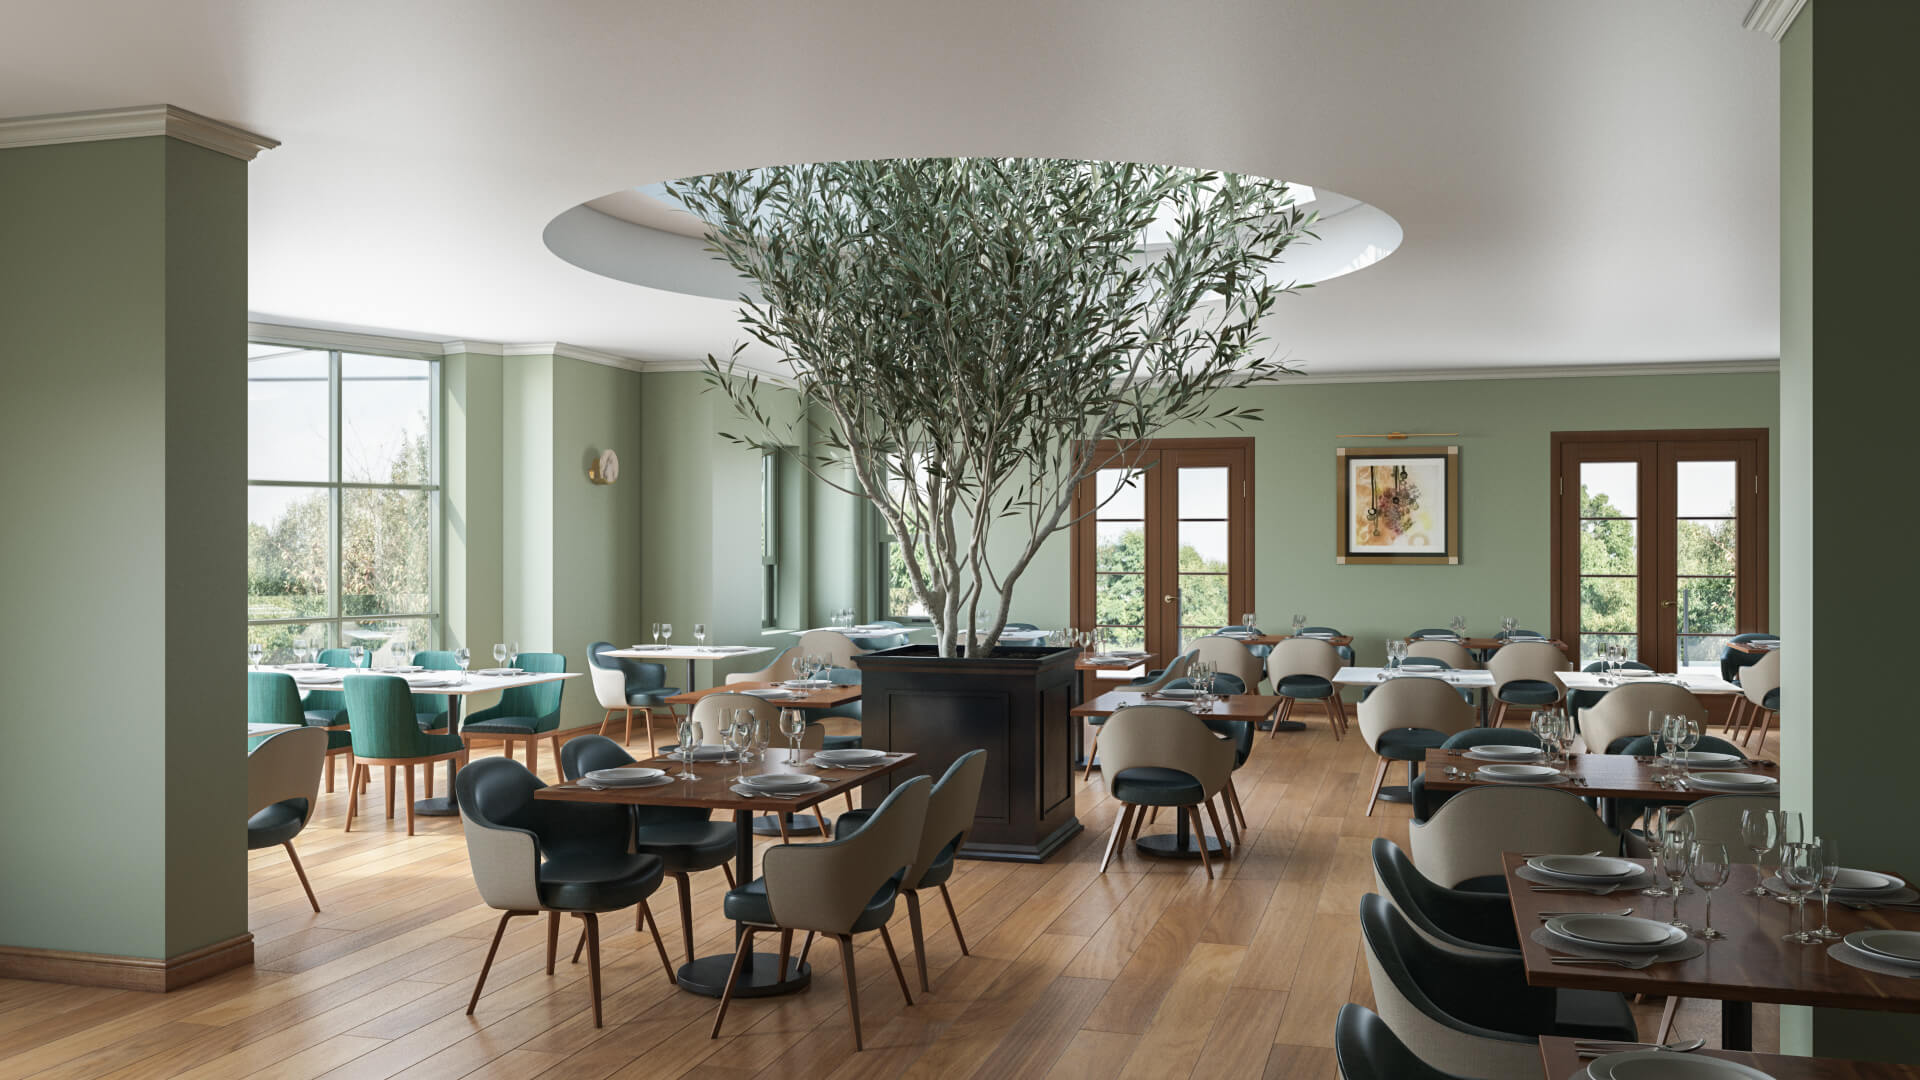 granduca dining room with tree in the center and beautiful ambiance